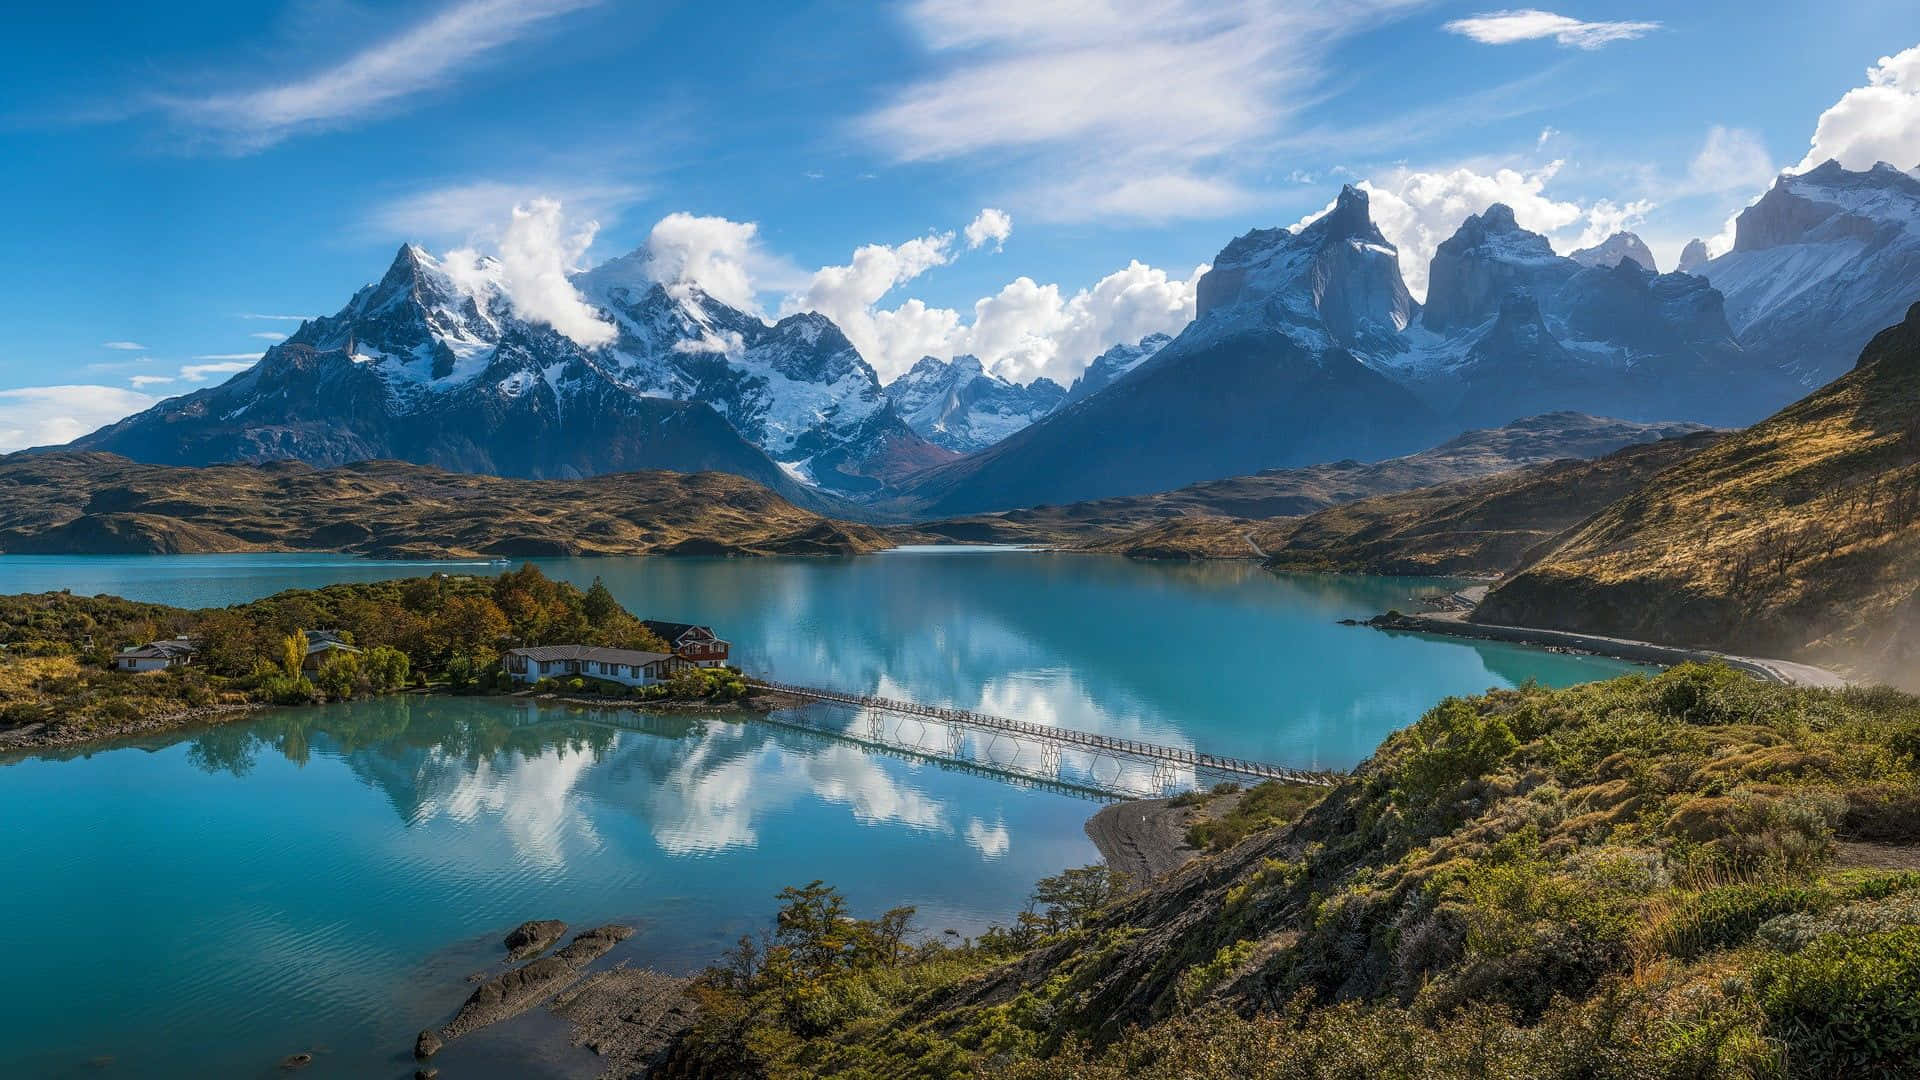 Enjoy the beauty of Patagonia's mountains